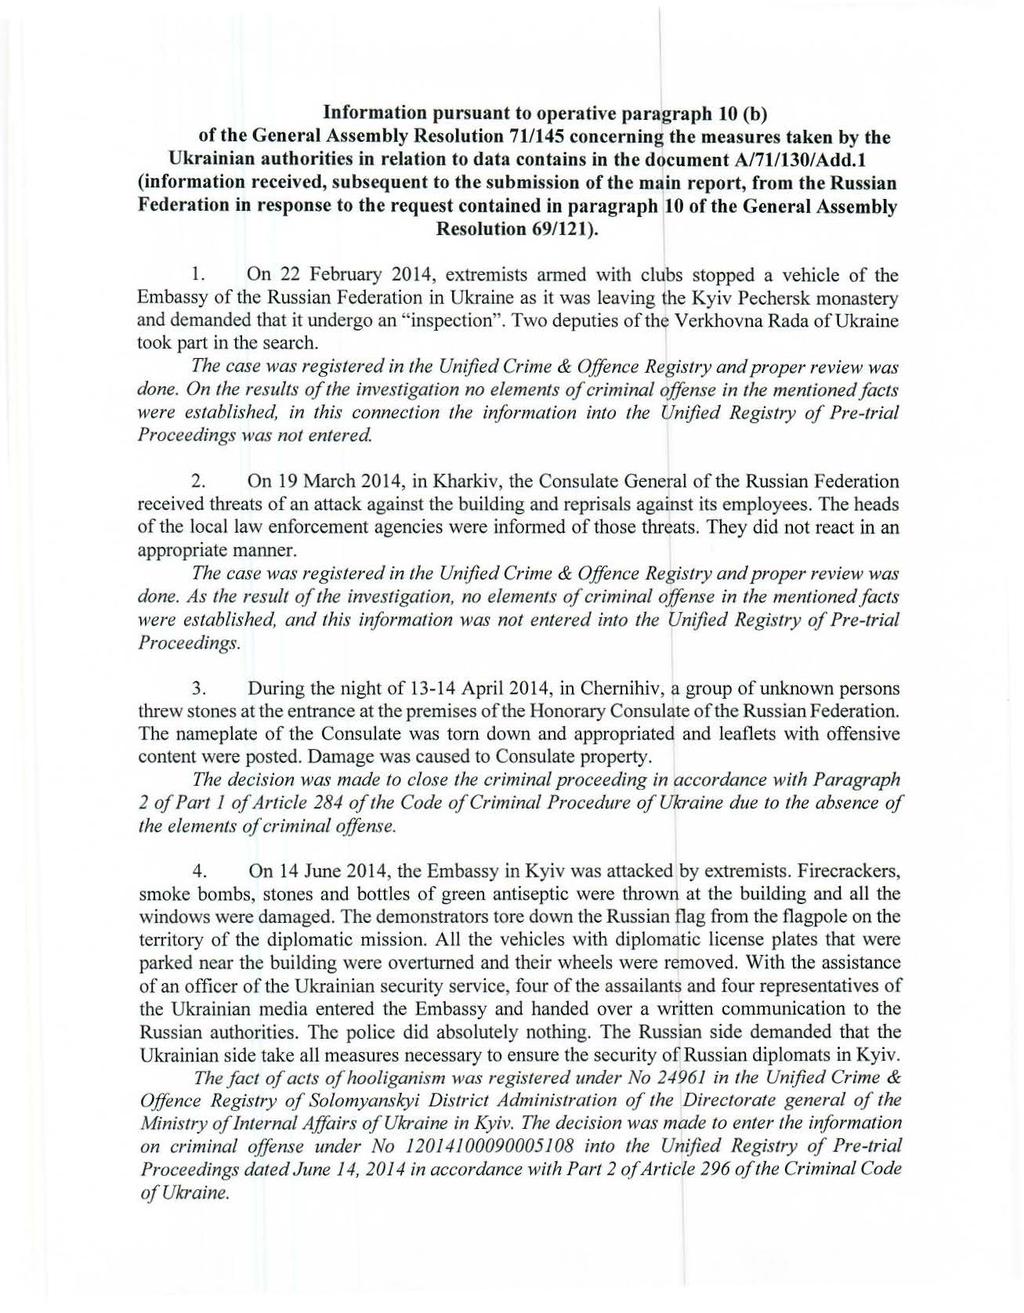 Information pursuant to operative paragraph 10 (b) of the General Assembly Resolution 711145 concerning the measures taken by the Ukrainian authorities in relation to data contains in the document